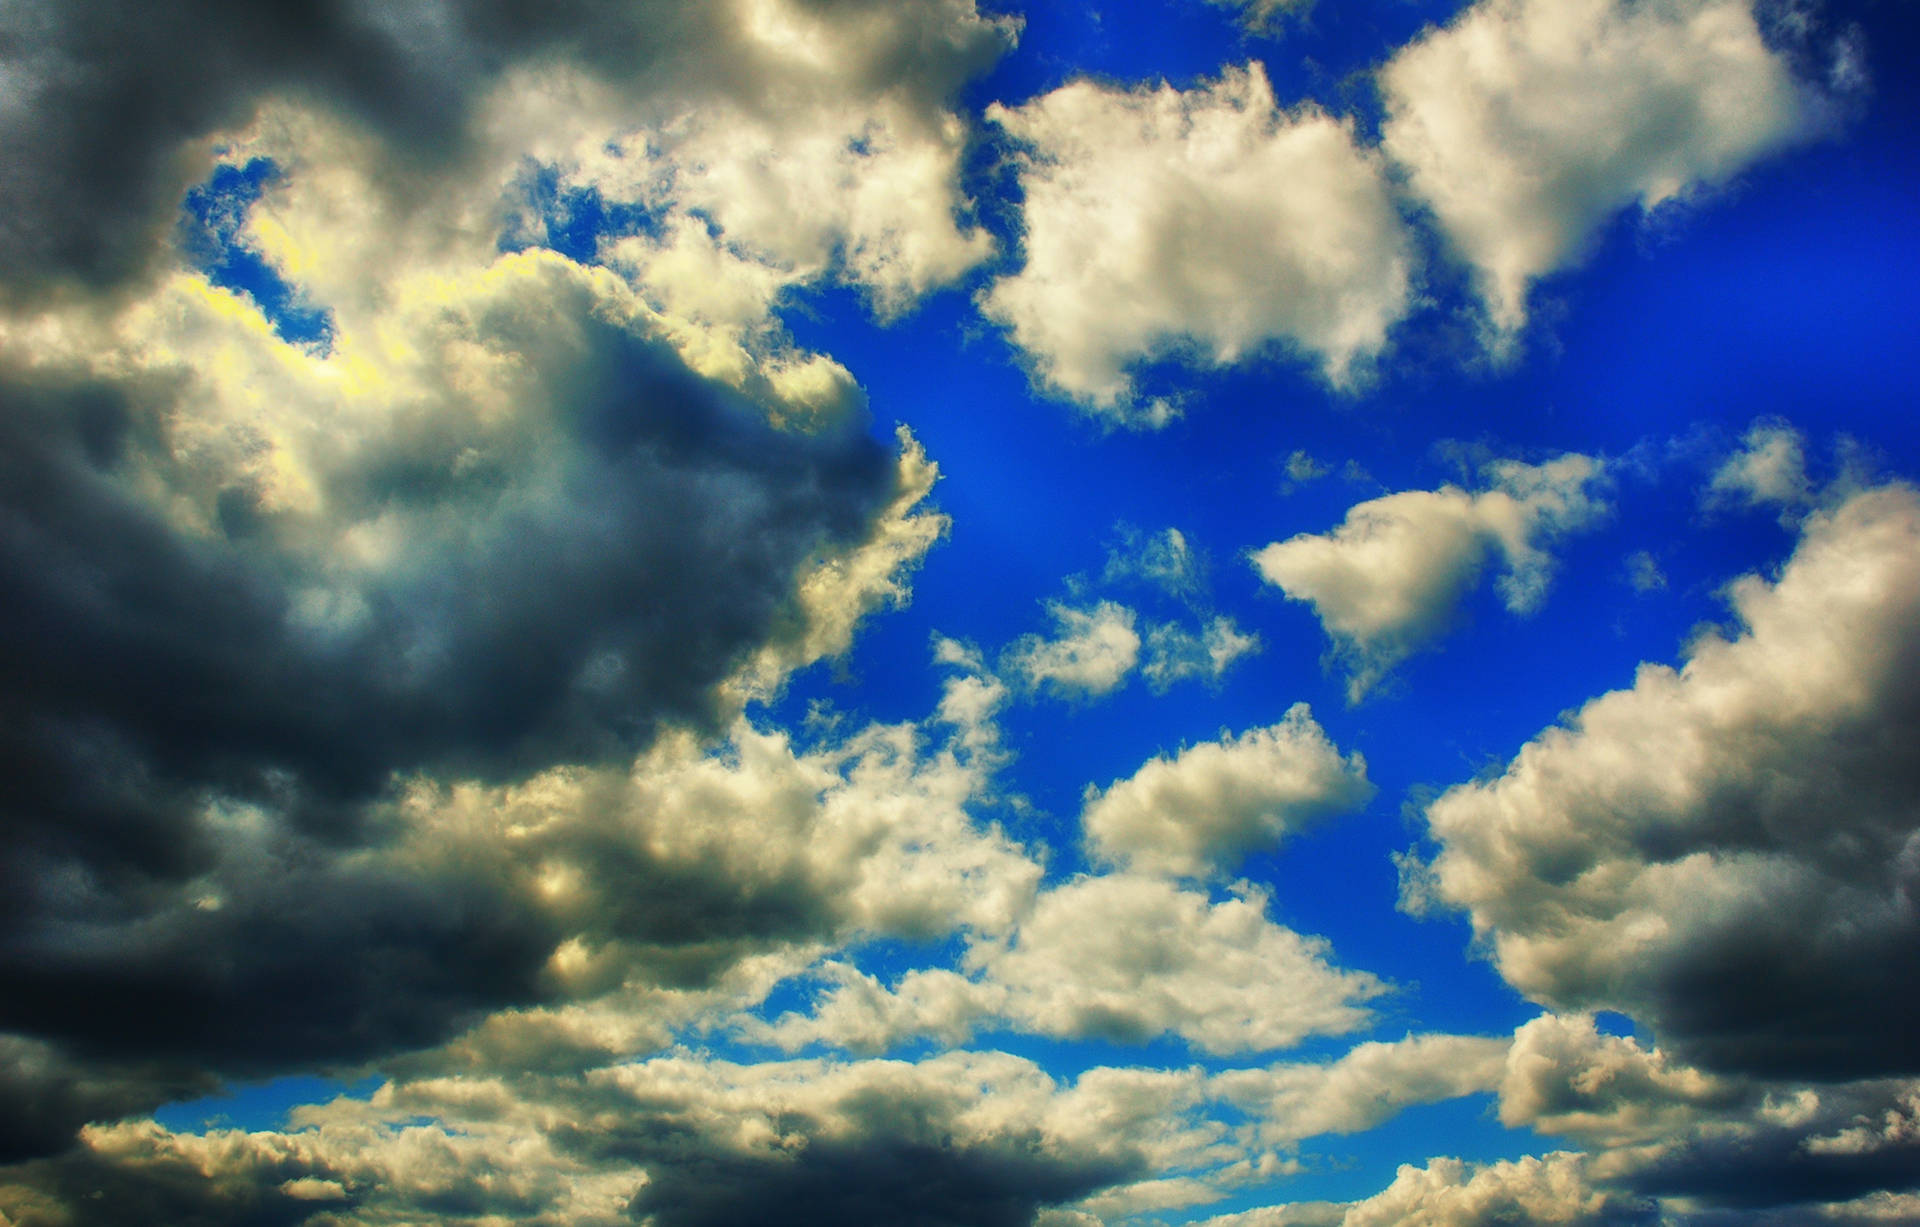 Saturated Clouds And Sky Hd Background